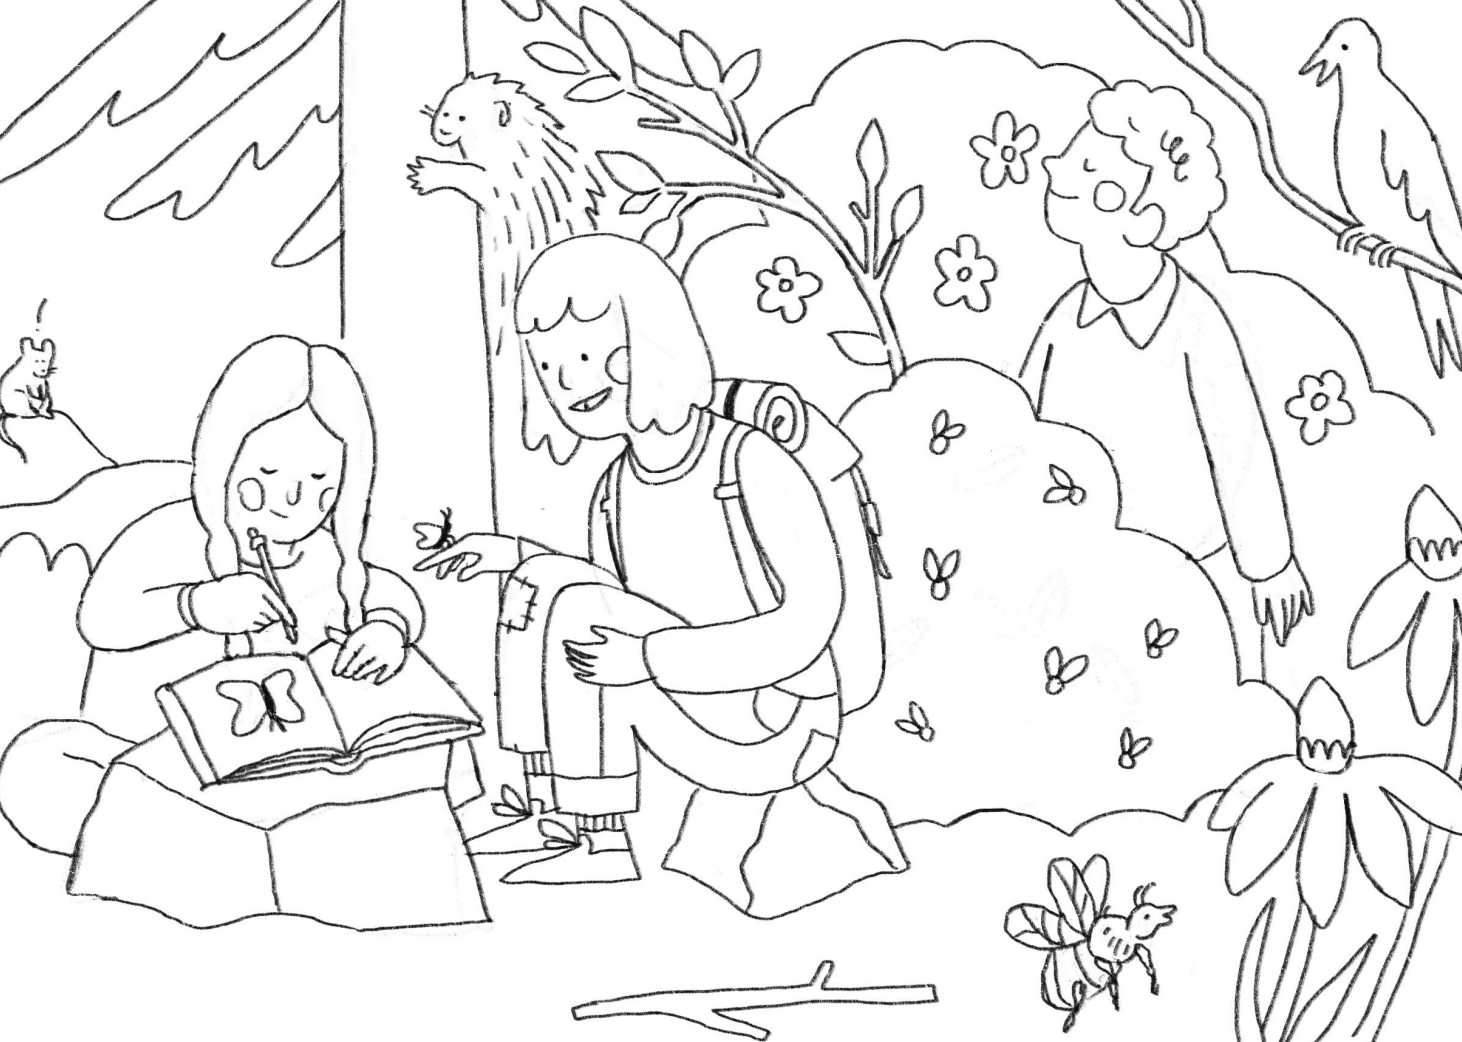 colouring page with a group of people in nature looking at the flowers and butterflies around them